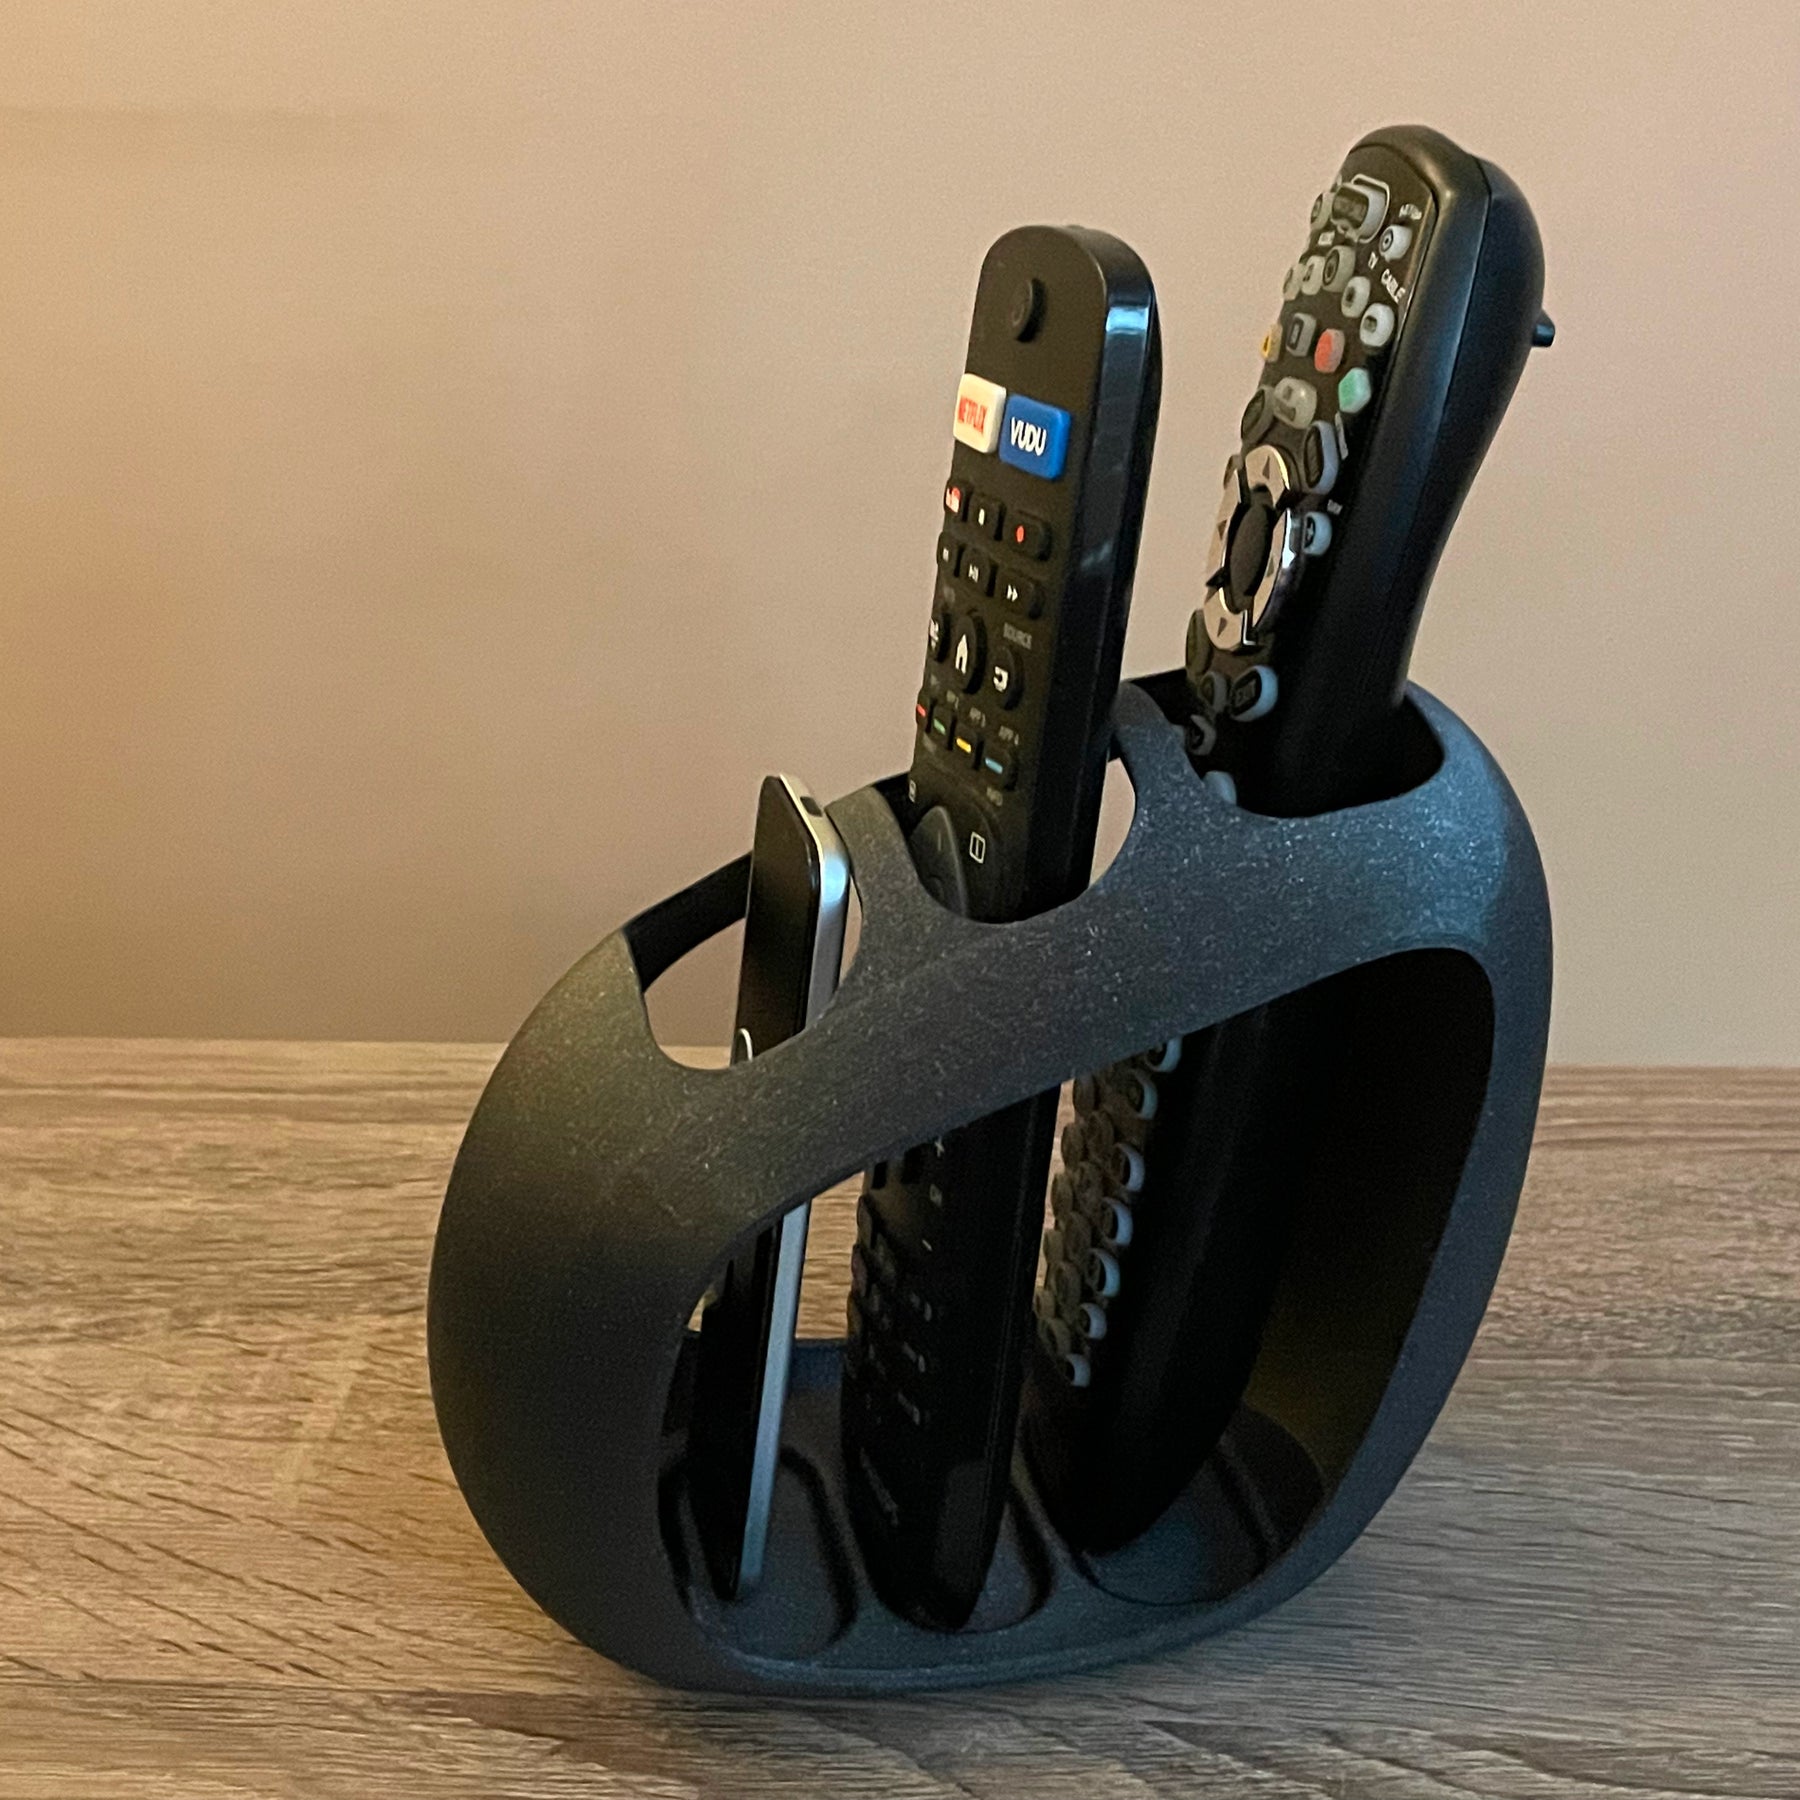 Cocoon Remote Stand